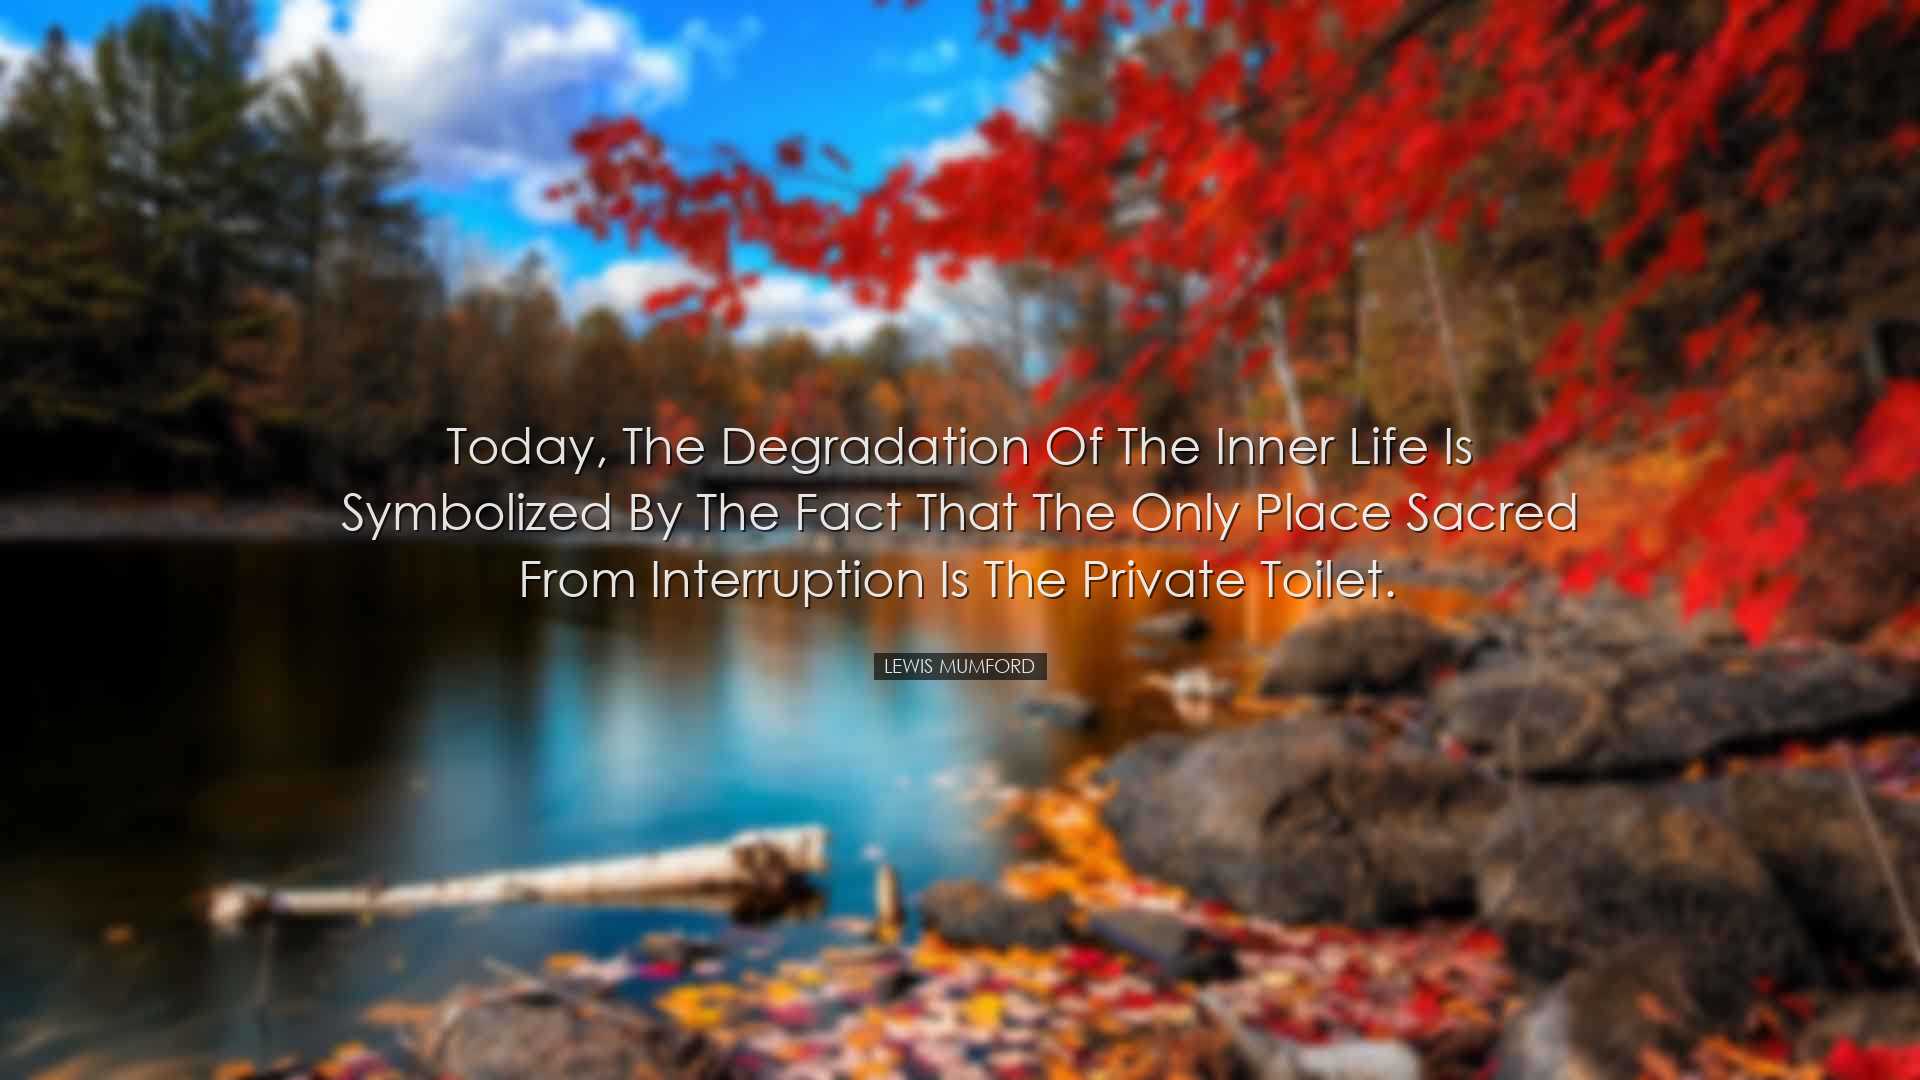 Today, the degradation of the inner life is symbolized by the fact